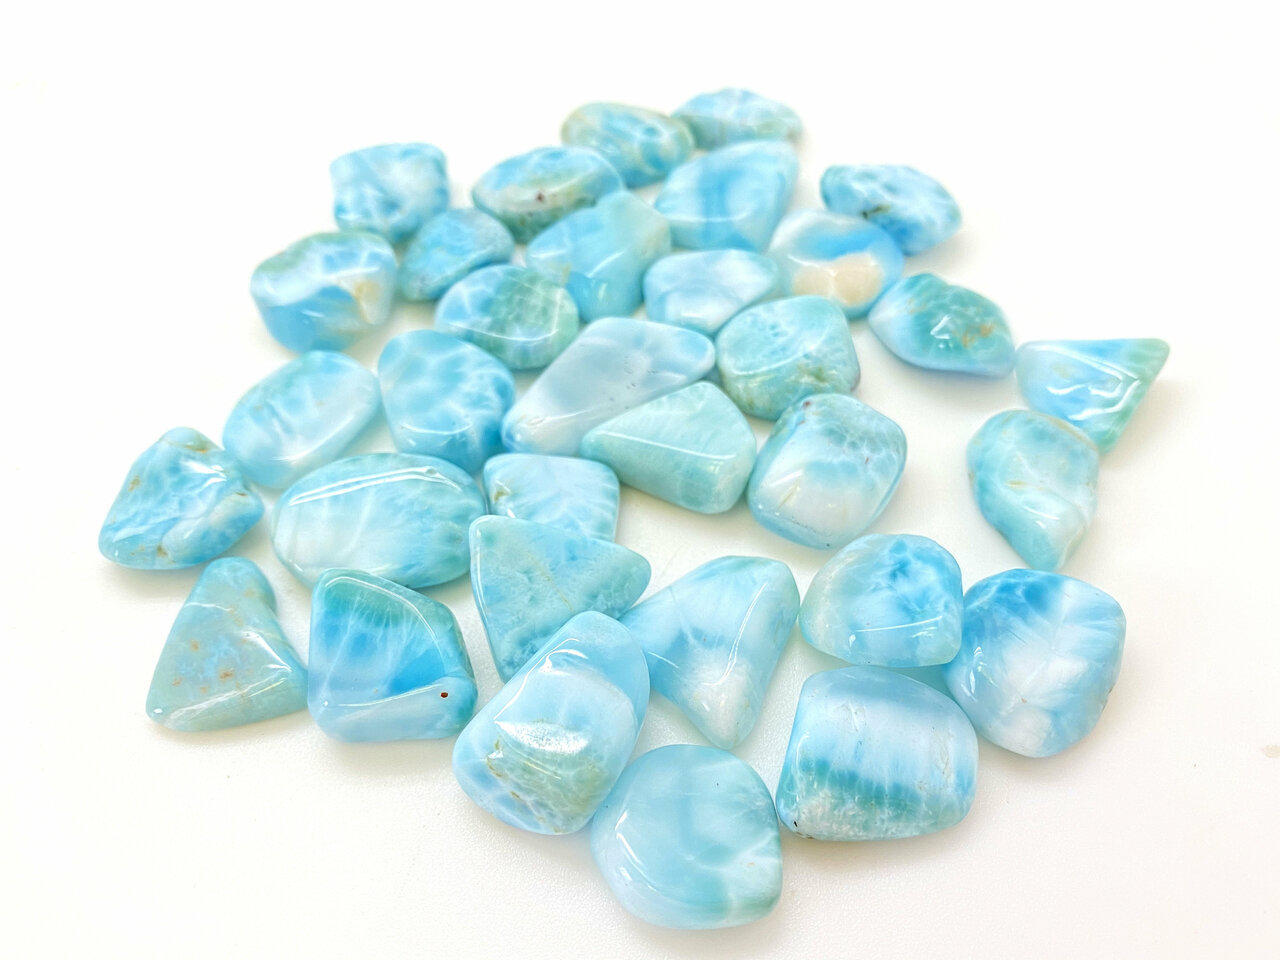 Many polished Larimar gemstones laying close to each other